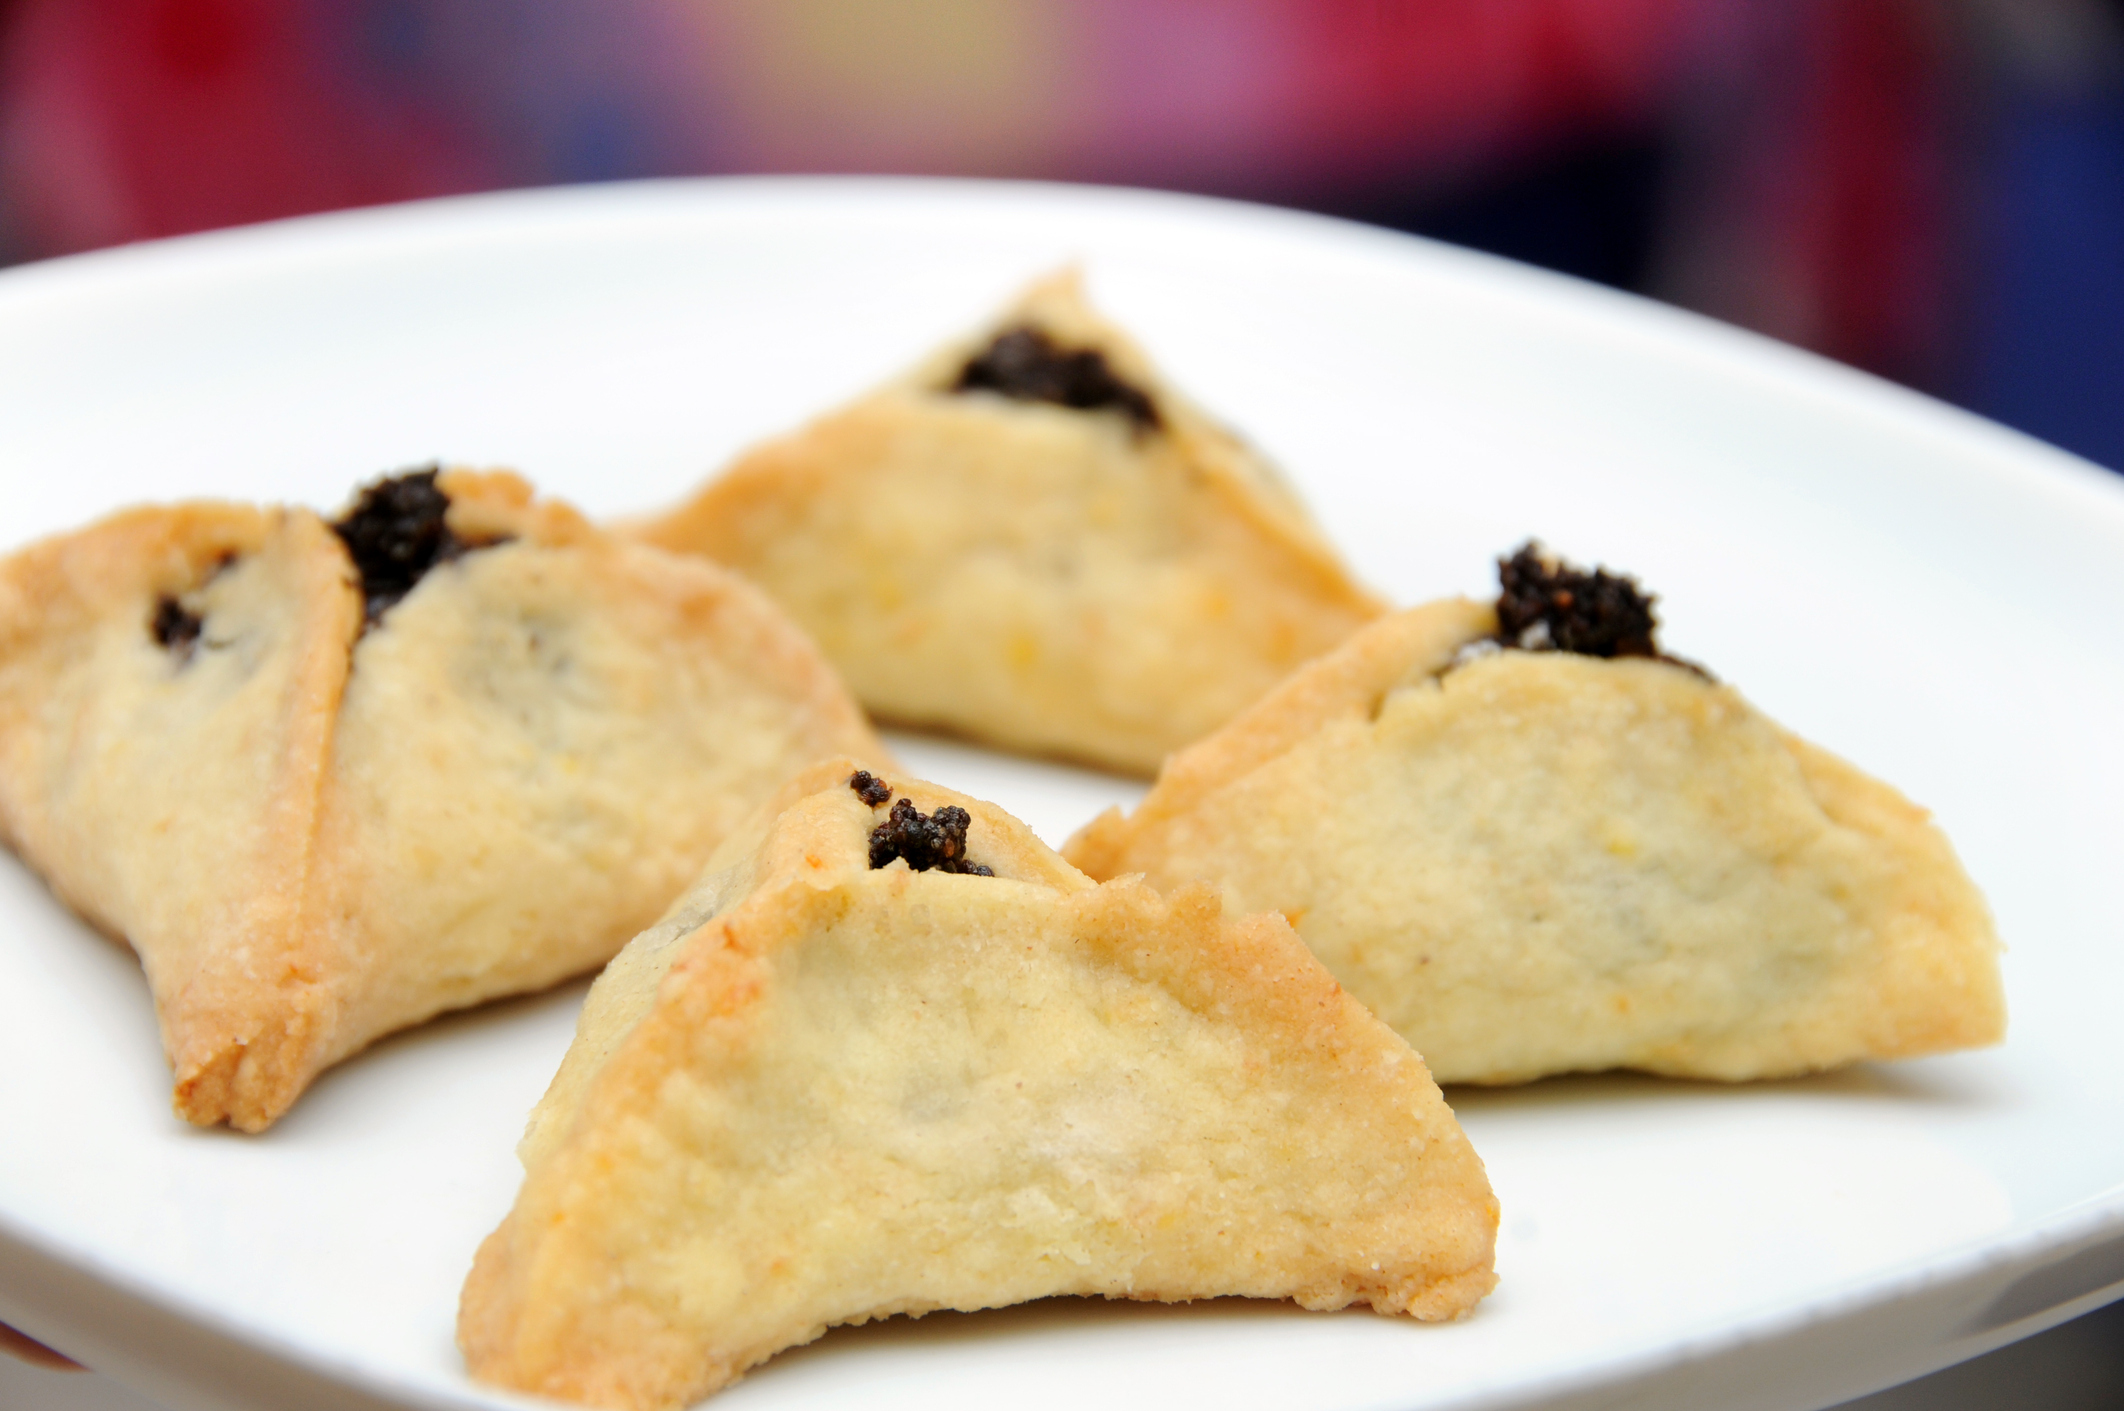 A plate of hamentaschen cookies filled with poppyseeds. (Yula—Getty Images/iStockphoto)